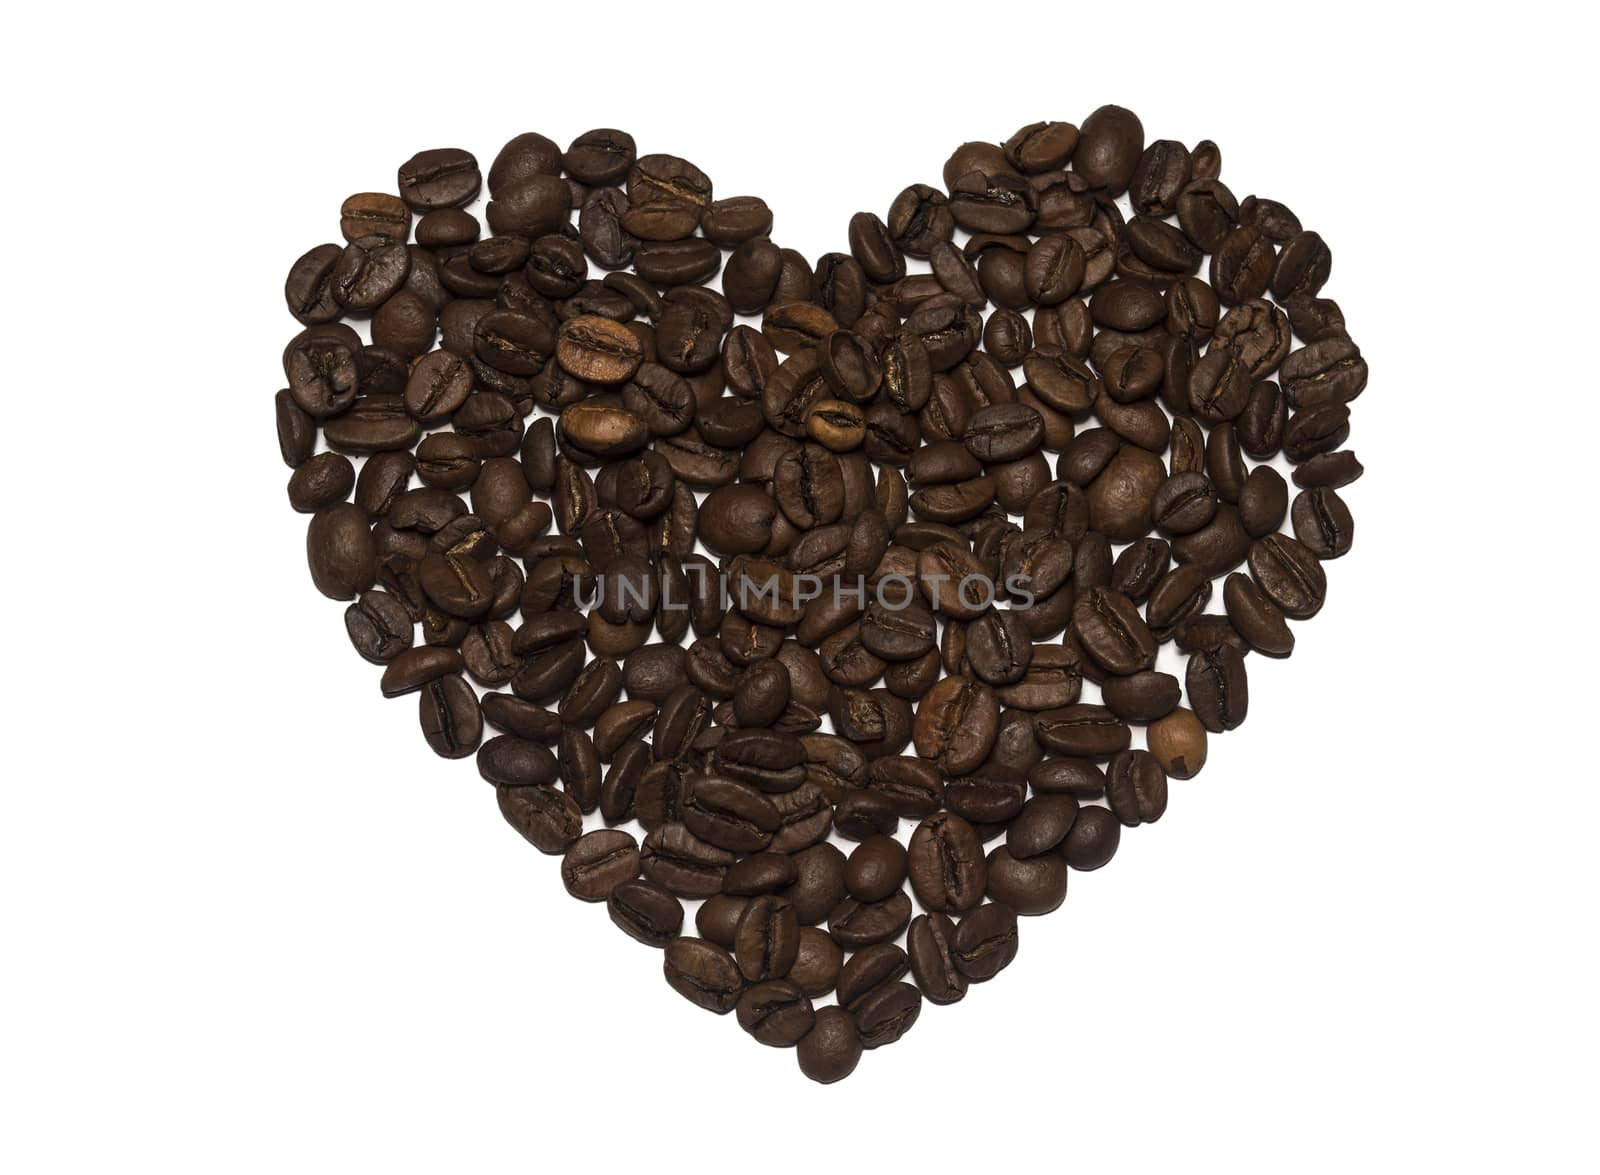 Heart shaped coffee beans isolated on white background by Milovan